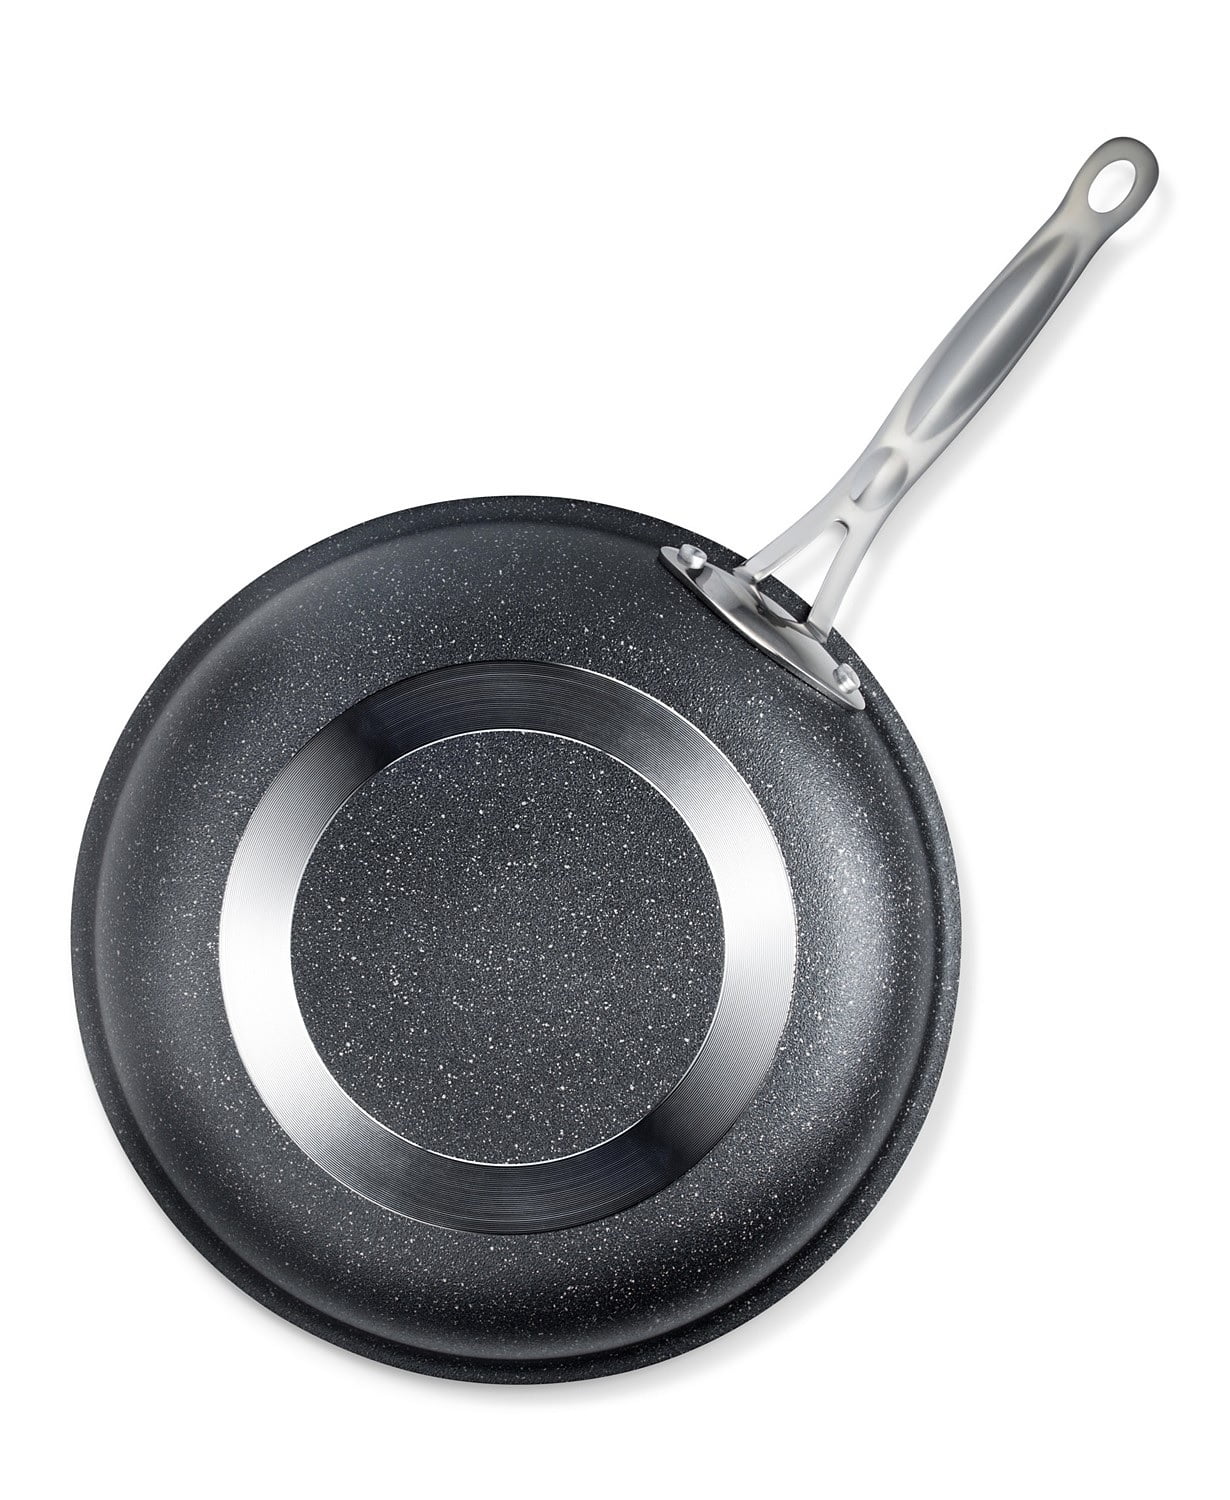 24cm (9.5 Inch) Non-Stick Frying Pan With Lid - Bed Bath & Beyond - 37882110